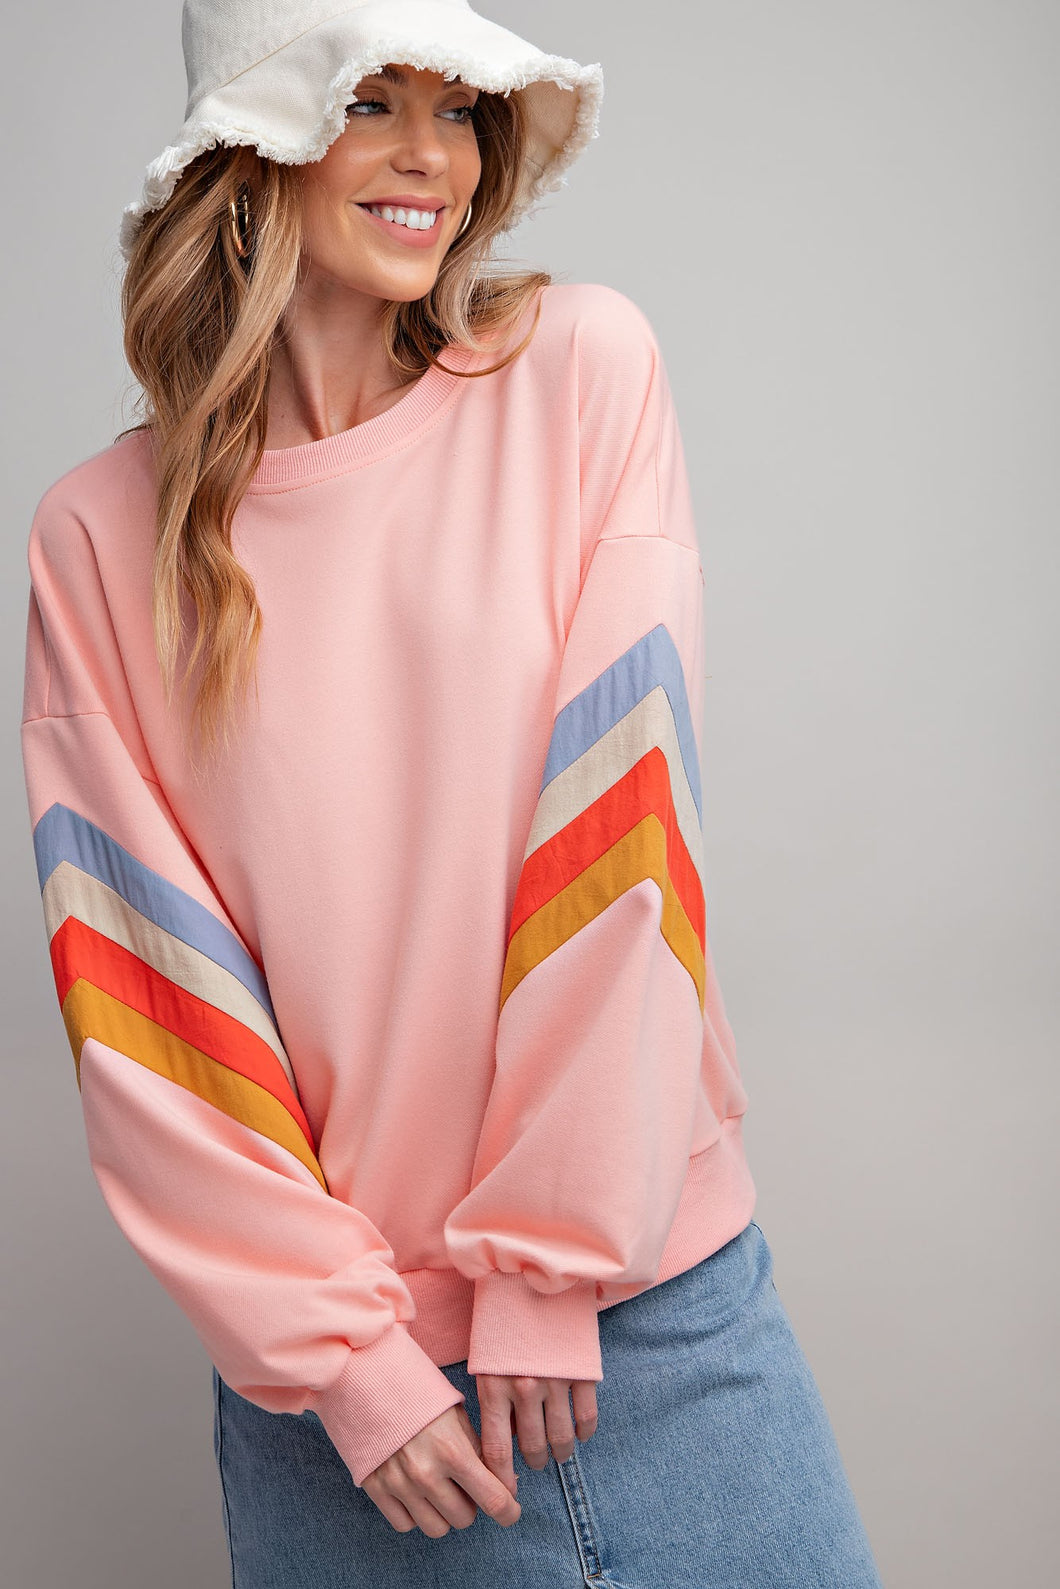 Easel Terry Knit Colorful Blocked Sleeves Top in Peach Shirts & Tops Easel   